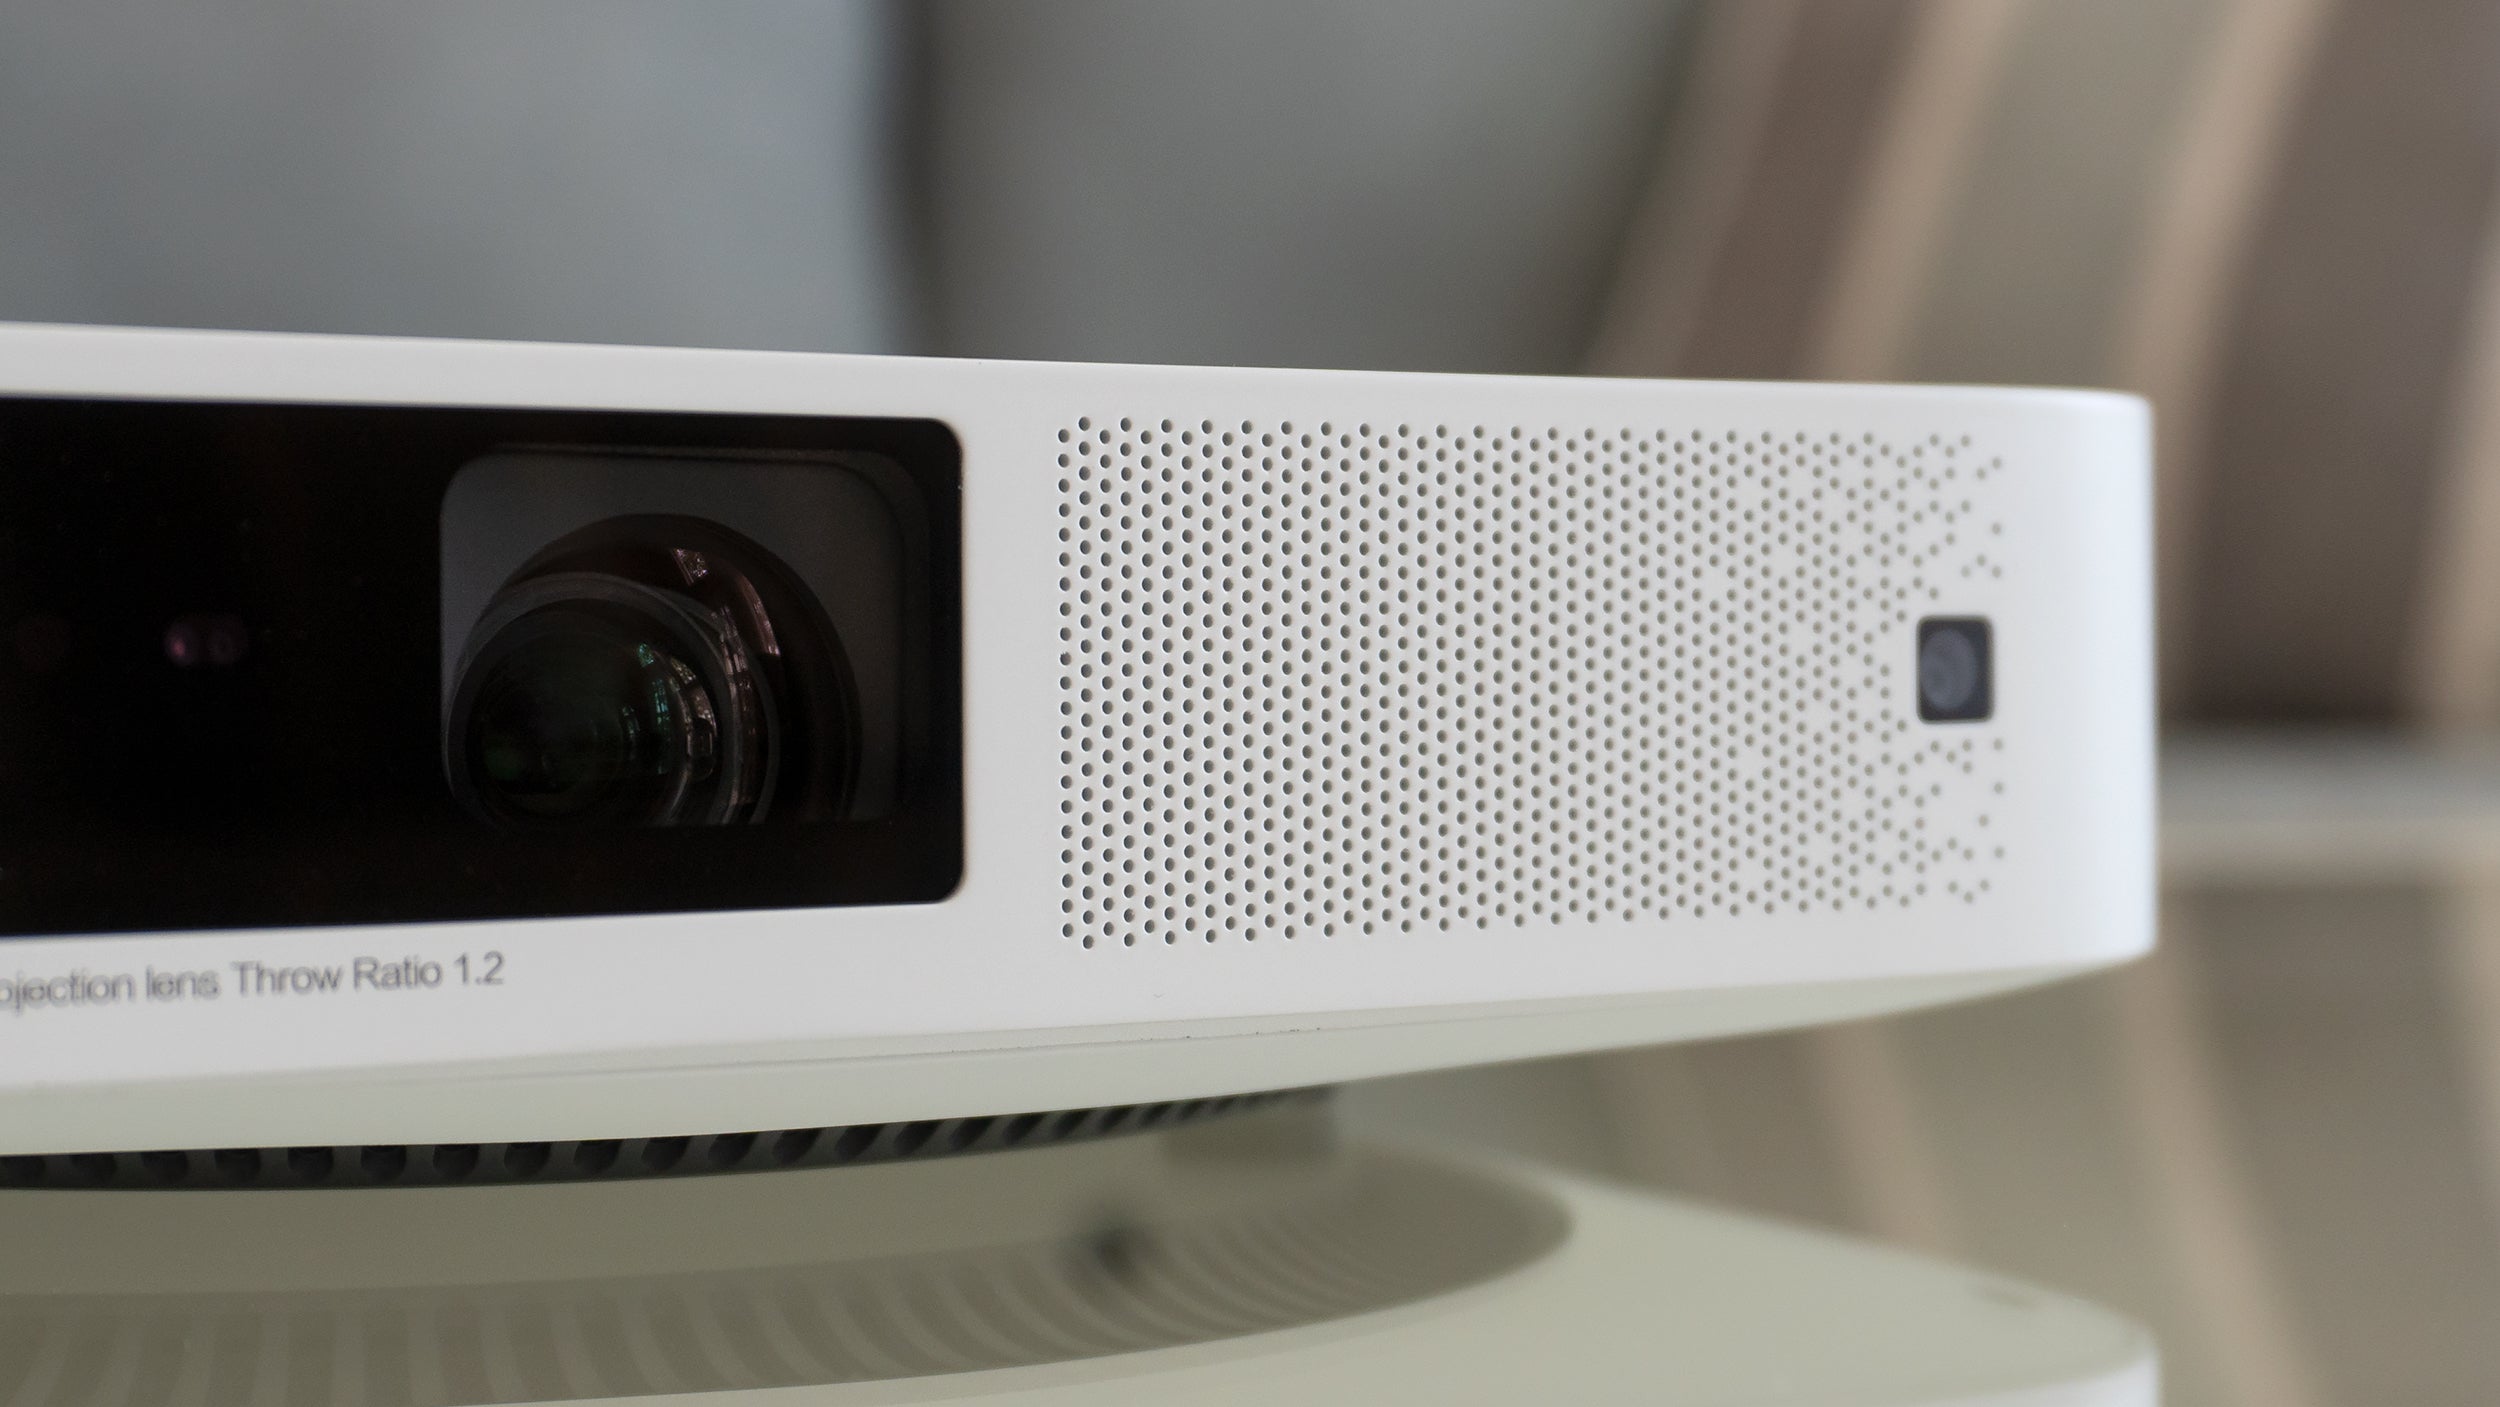 The Elfin projector features a pair of 3-watt Harman Kardon speakers built in, and while they're plenty loud, the bass performance leaves something to be desired. Don't expect the full movie theatre experience unless you pair the projector with external speakers. (Photo: Andrew Liszewski - Gizmodo)